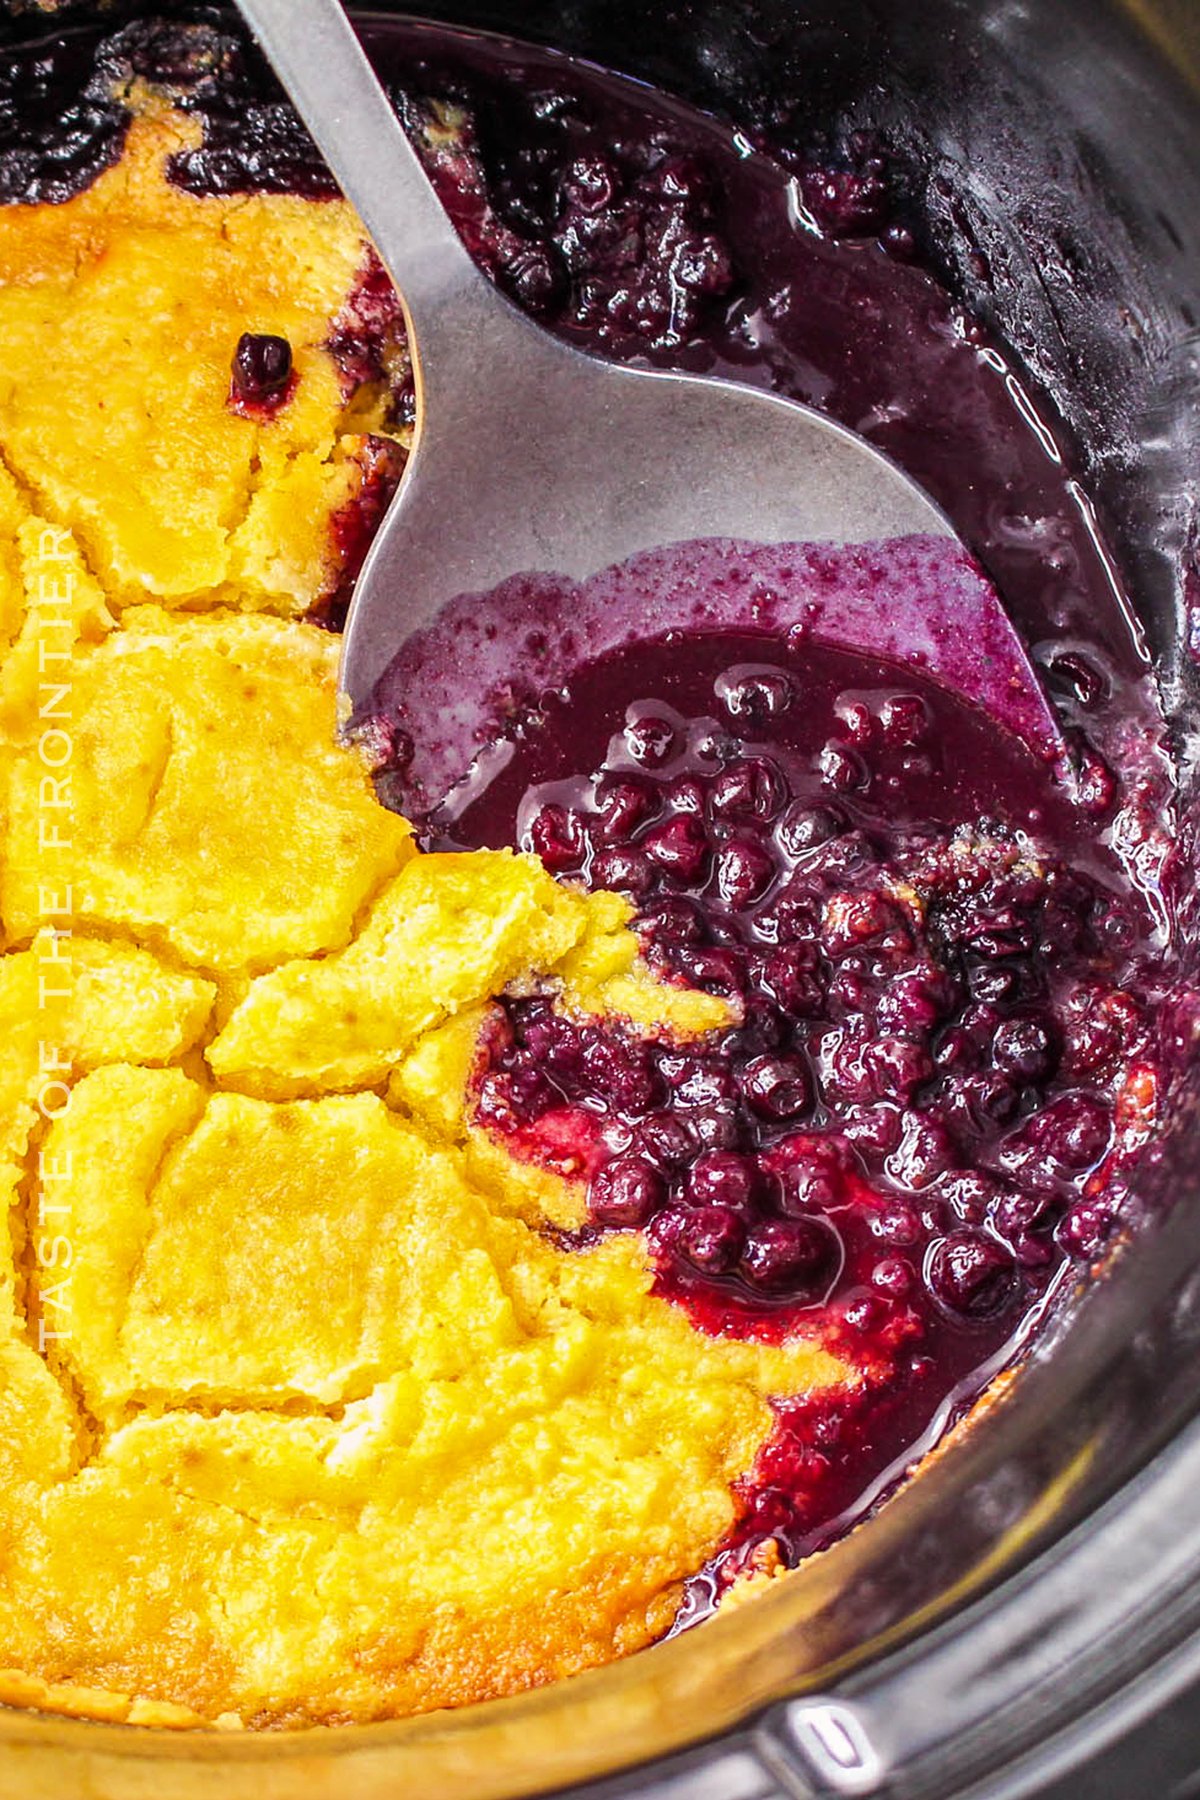 Slow Cooker Dessert with Blueberries